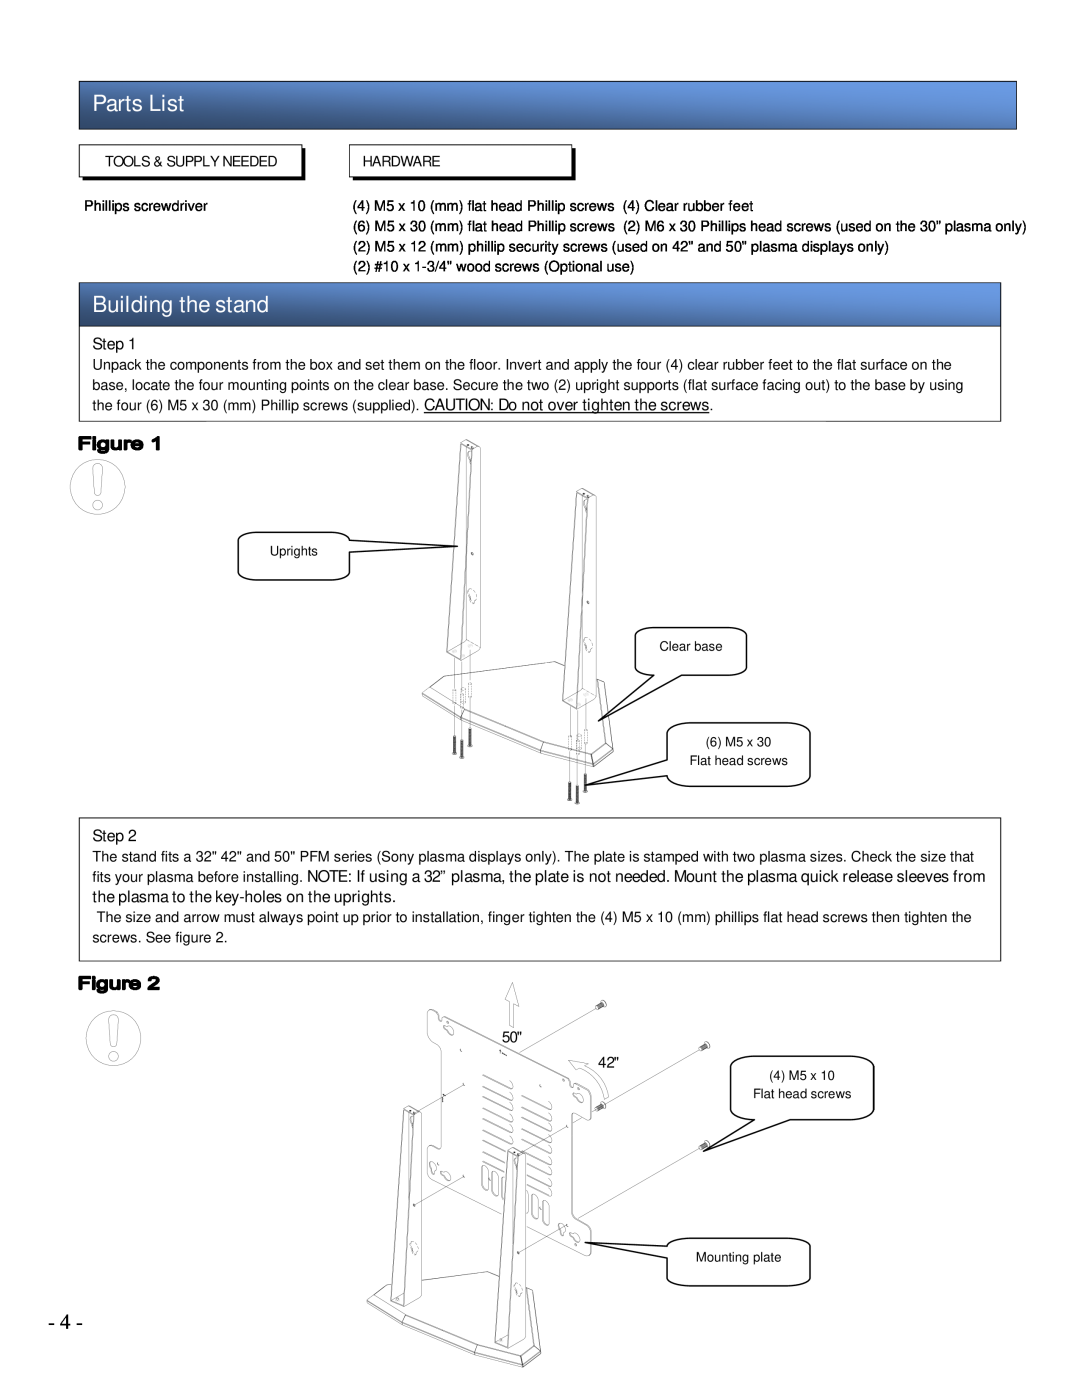 Sony SPM-TRI/C installation manual Parts List, Building the stand, Step 